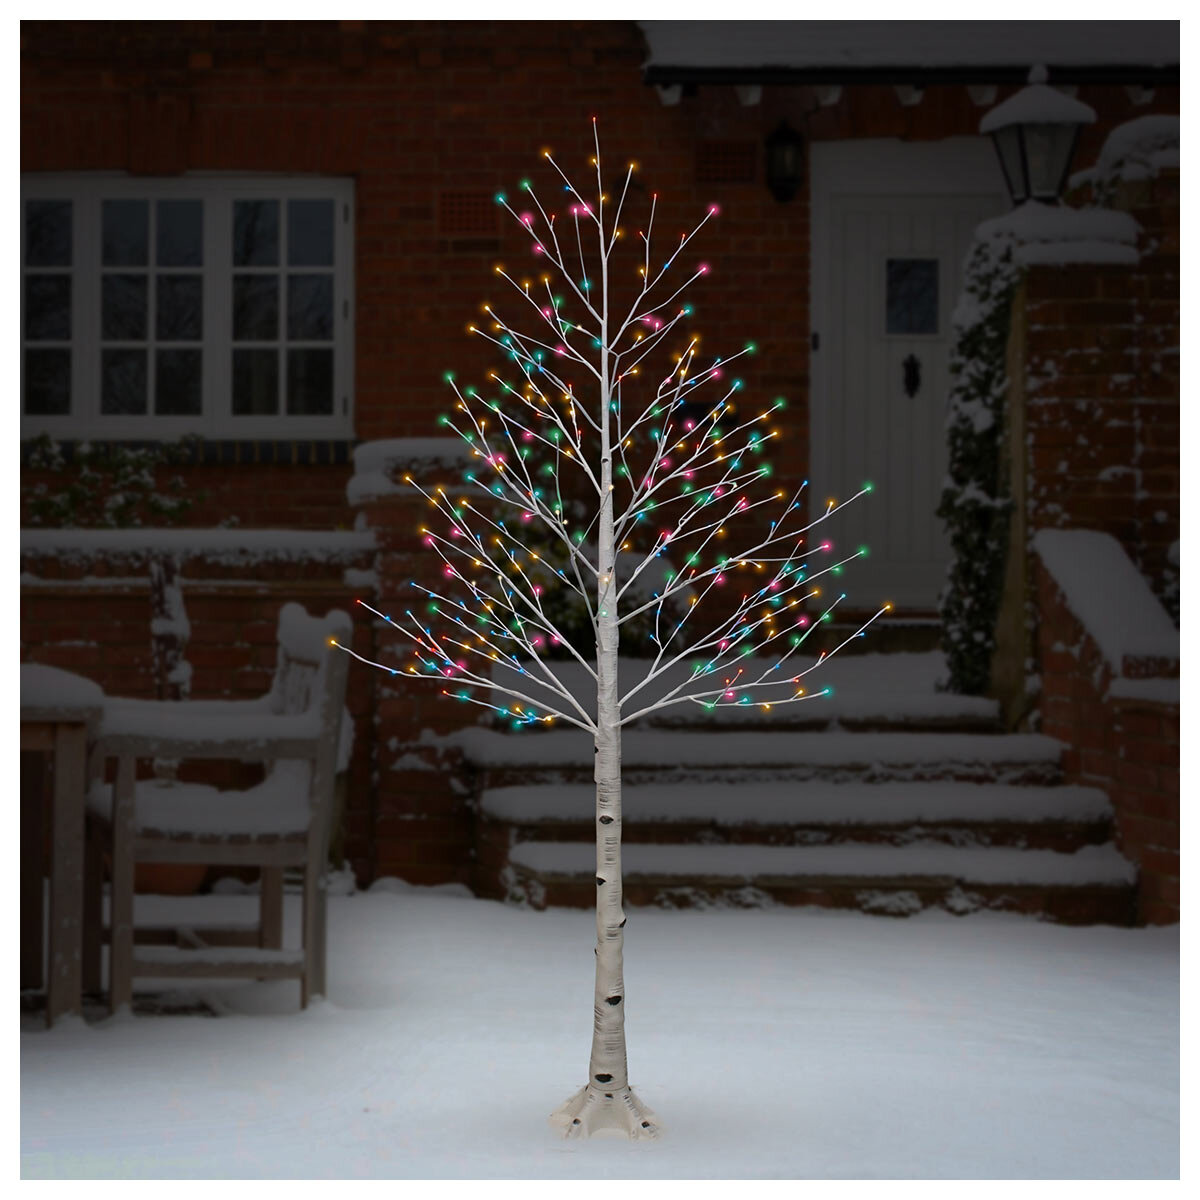 Buy Colour Select LED Birch Tree Lifestyle1 Image at Costco.co.uk